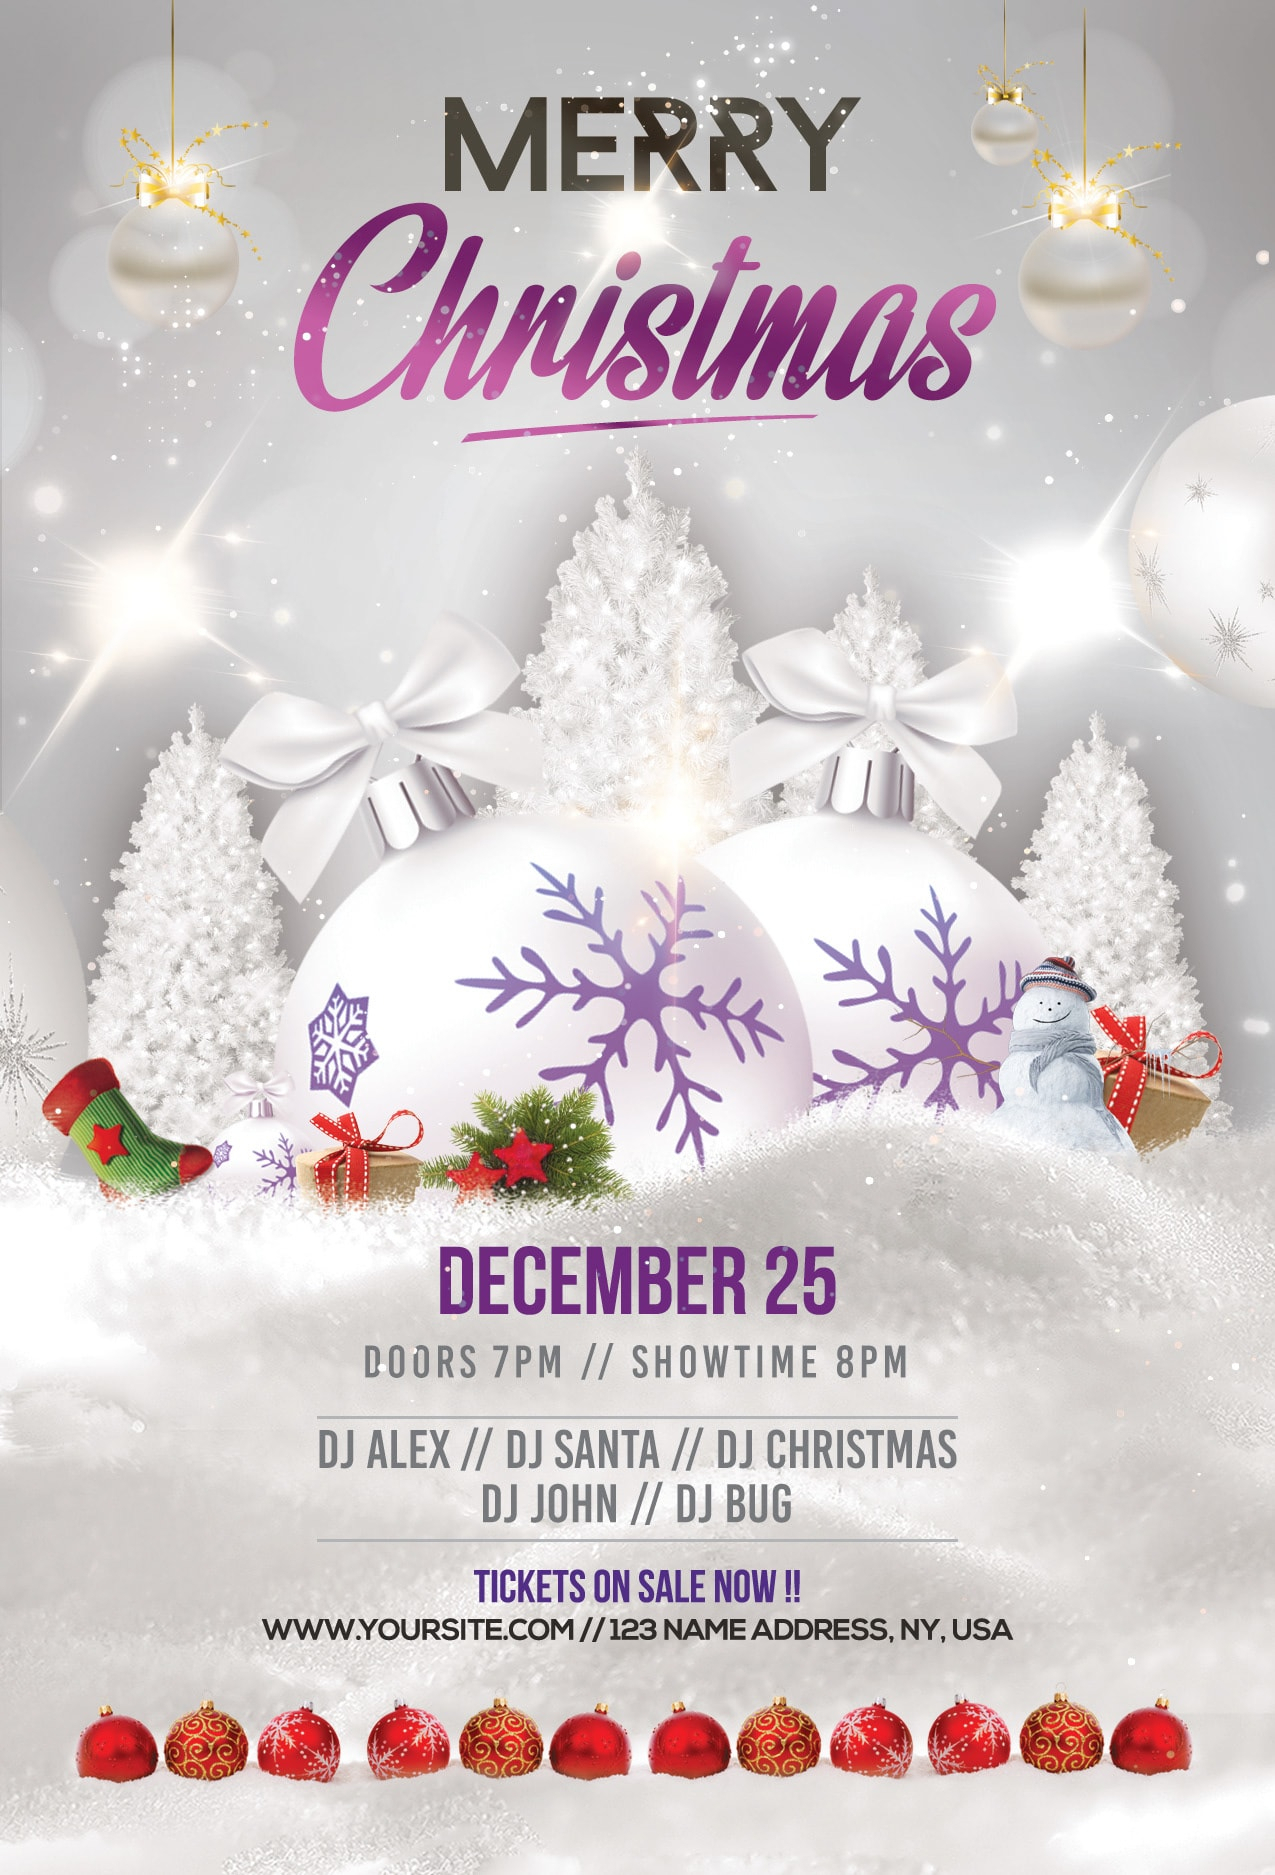 Merry Christmas & Holiday Free Psd Flyer Template – Free Psd In Christmas Brochure Templates Free